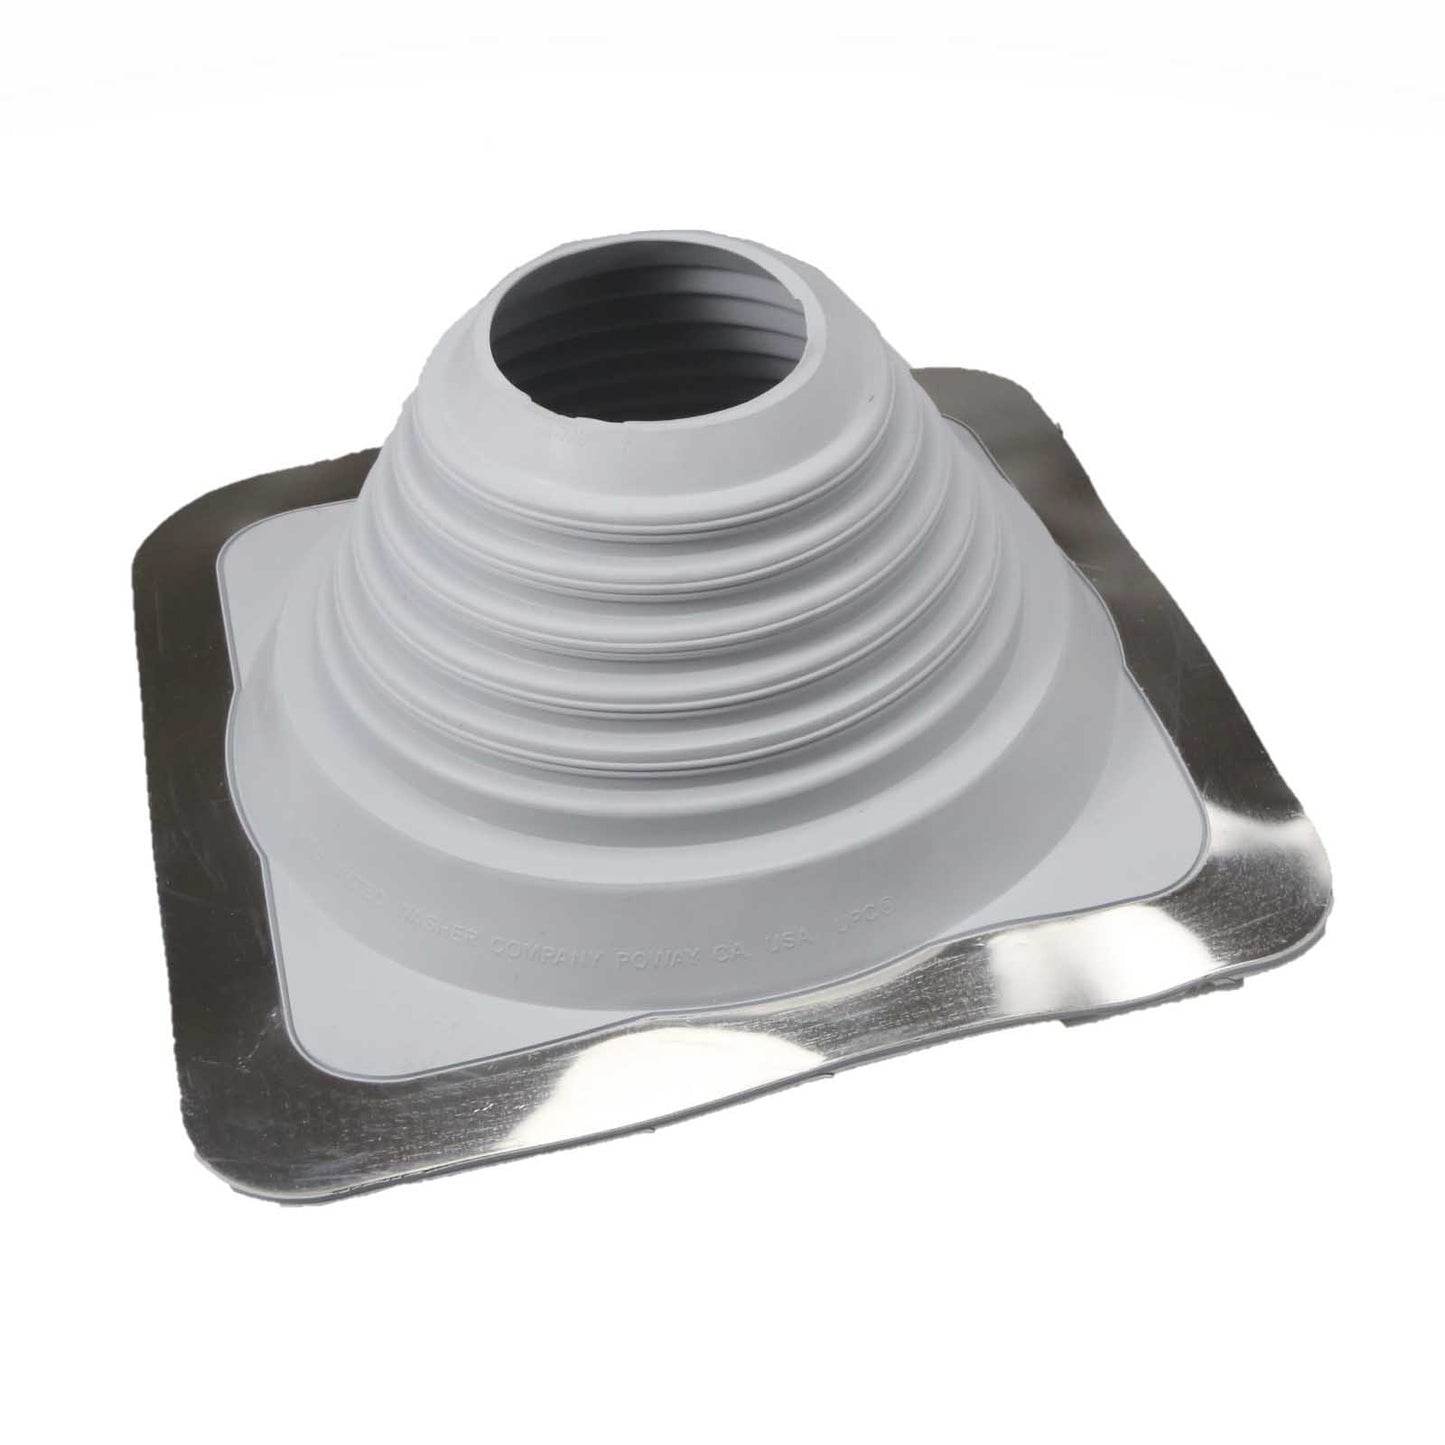 #5 Roofjack Square EPDM Pipe Flashing Boot Gray